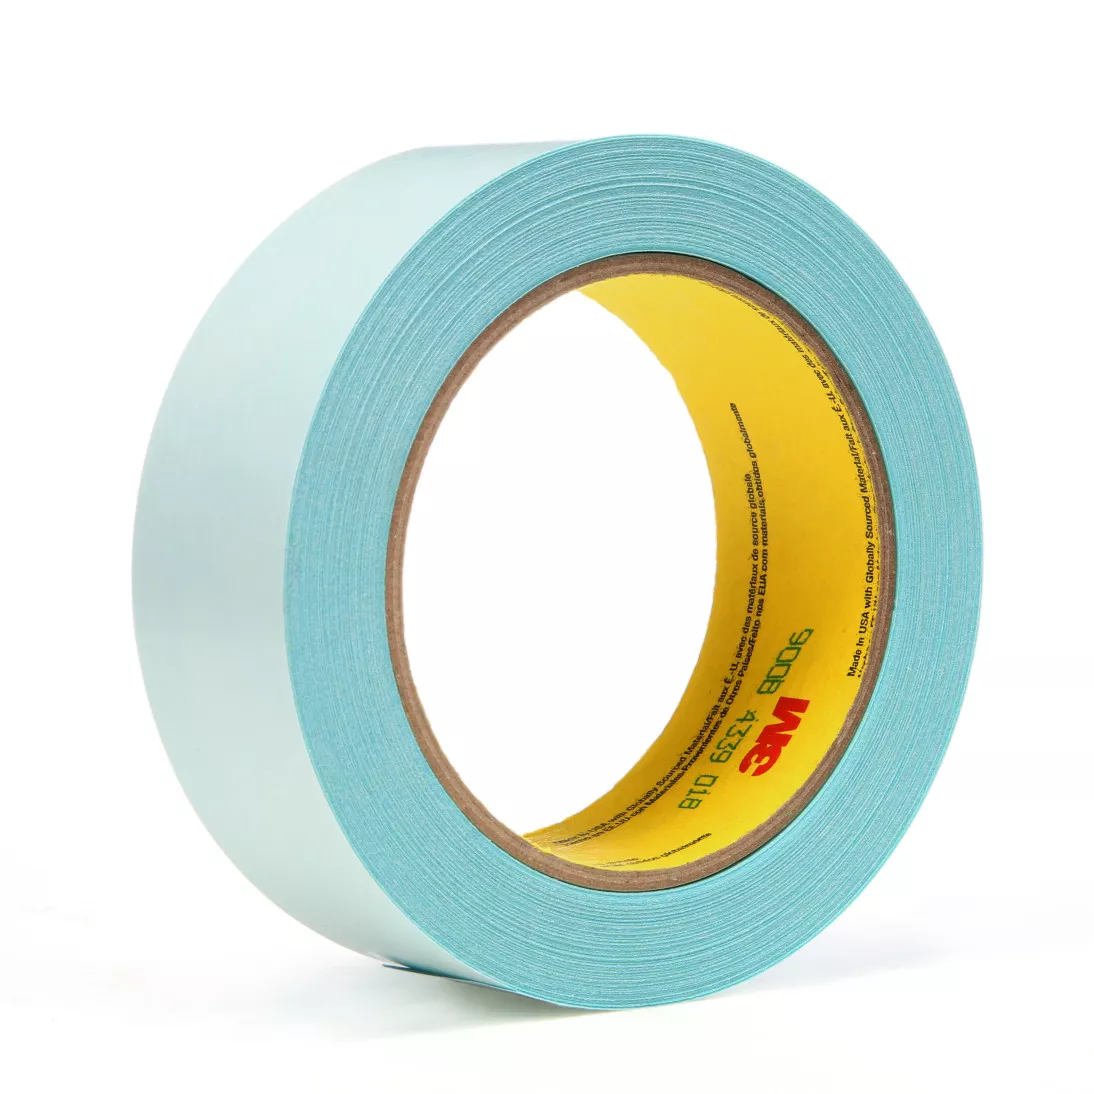 3M™ Repulpable Double Coated Splicing Tape 900, 36 mm x 33 m, 2.5 mil,
24 rolls per case